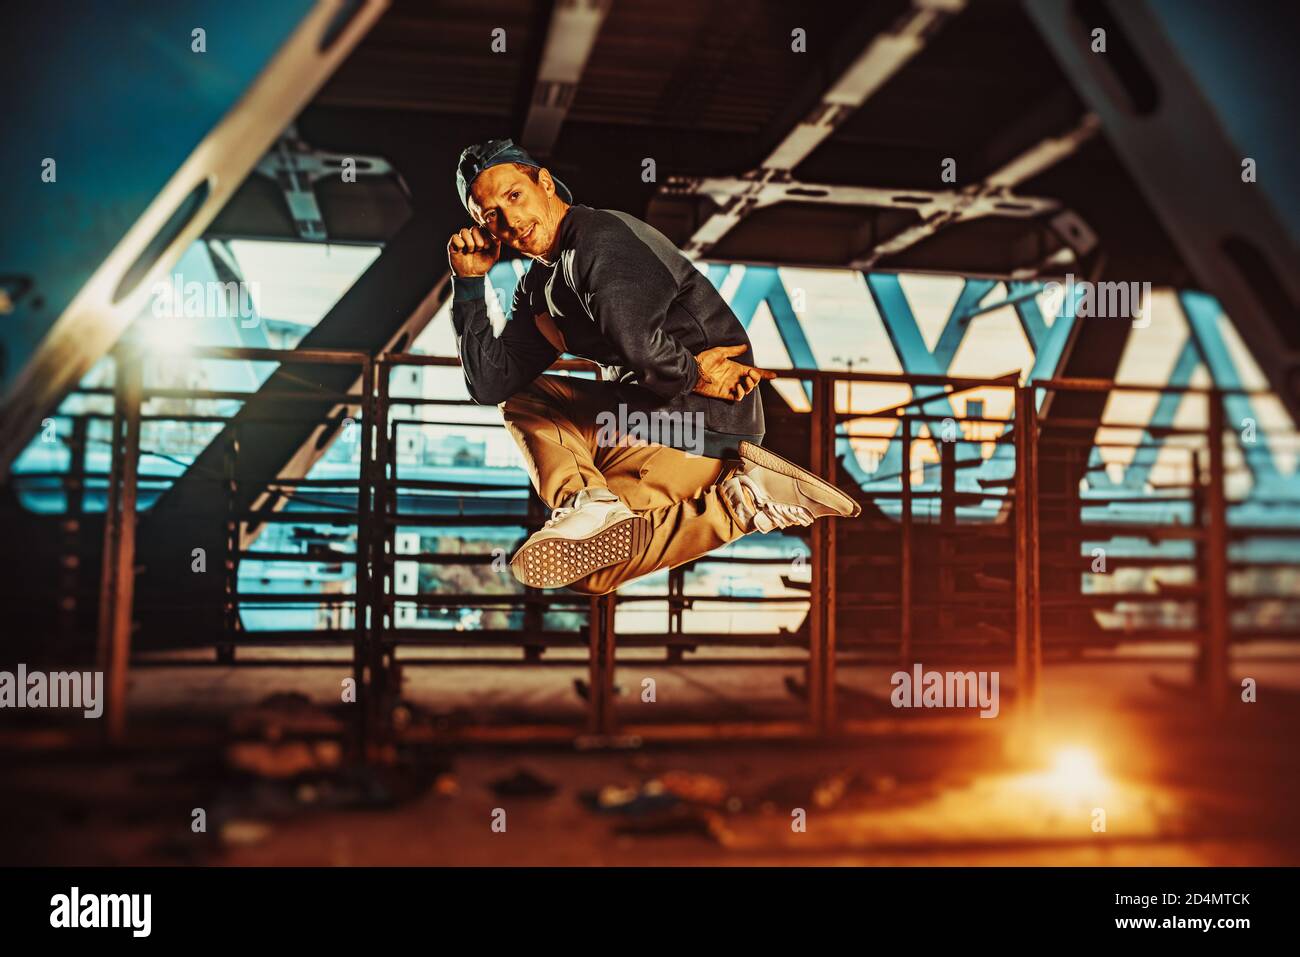 Young cool man break dancer jumping. Urban bridge with cool and warm lights background. Stock Photo